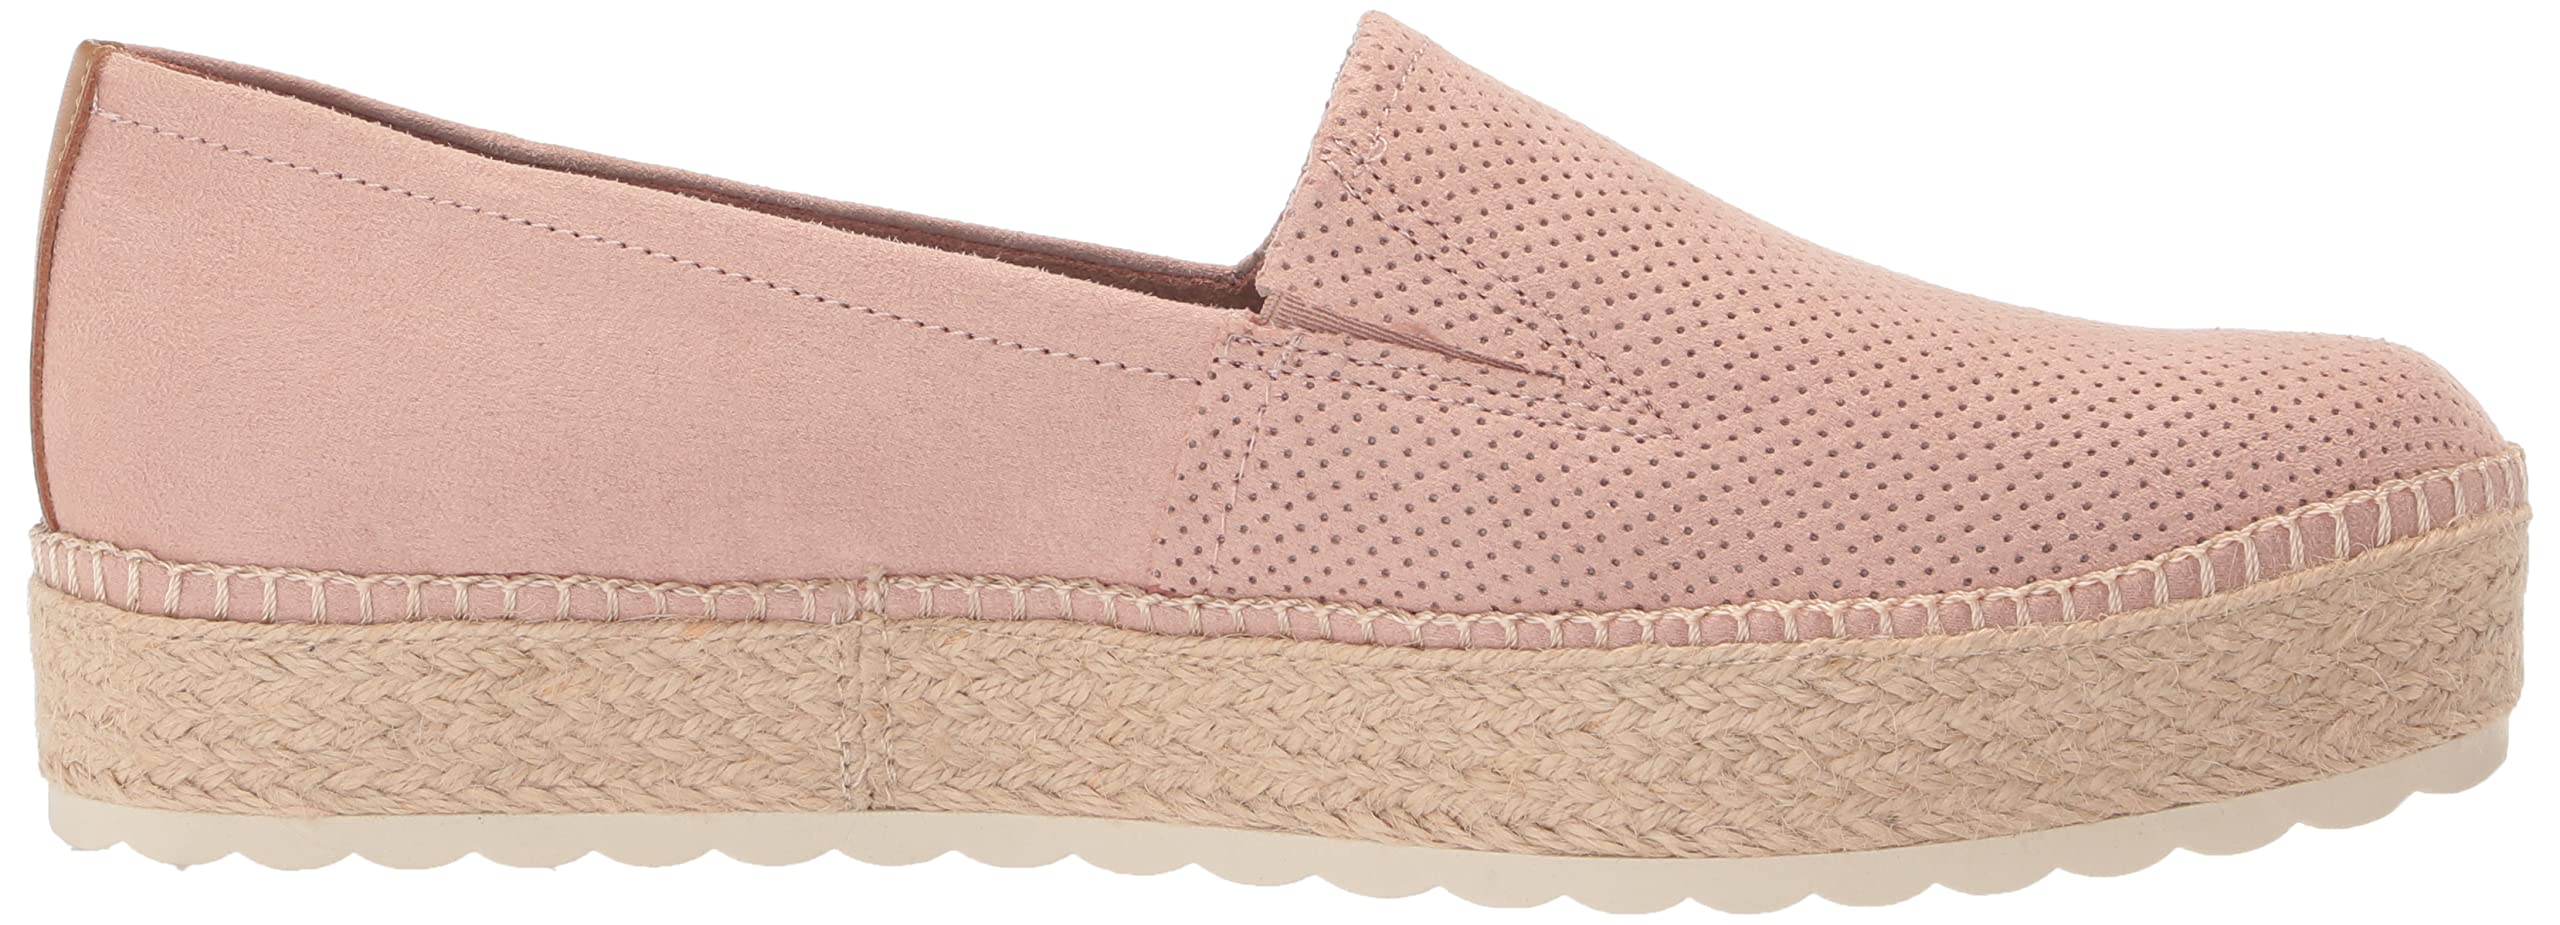 Dr. Scholl's Shoes Women's Sunray Espadrilles Loafer